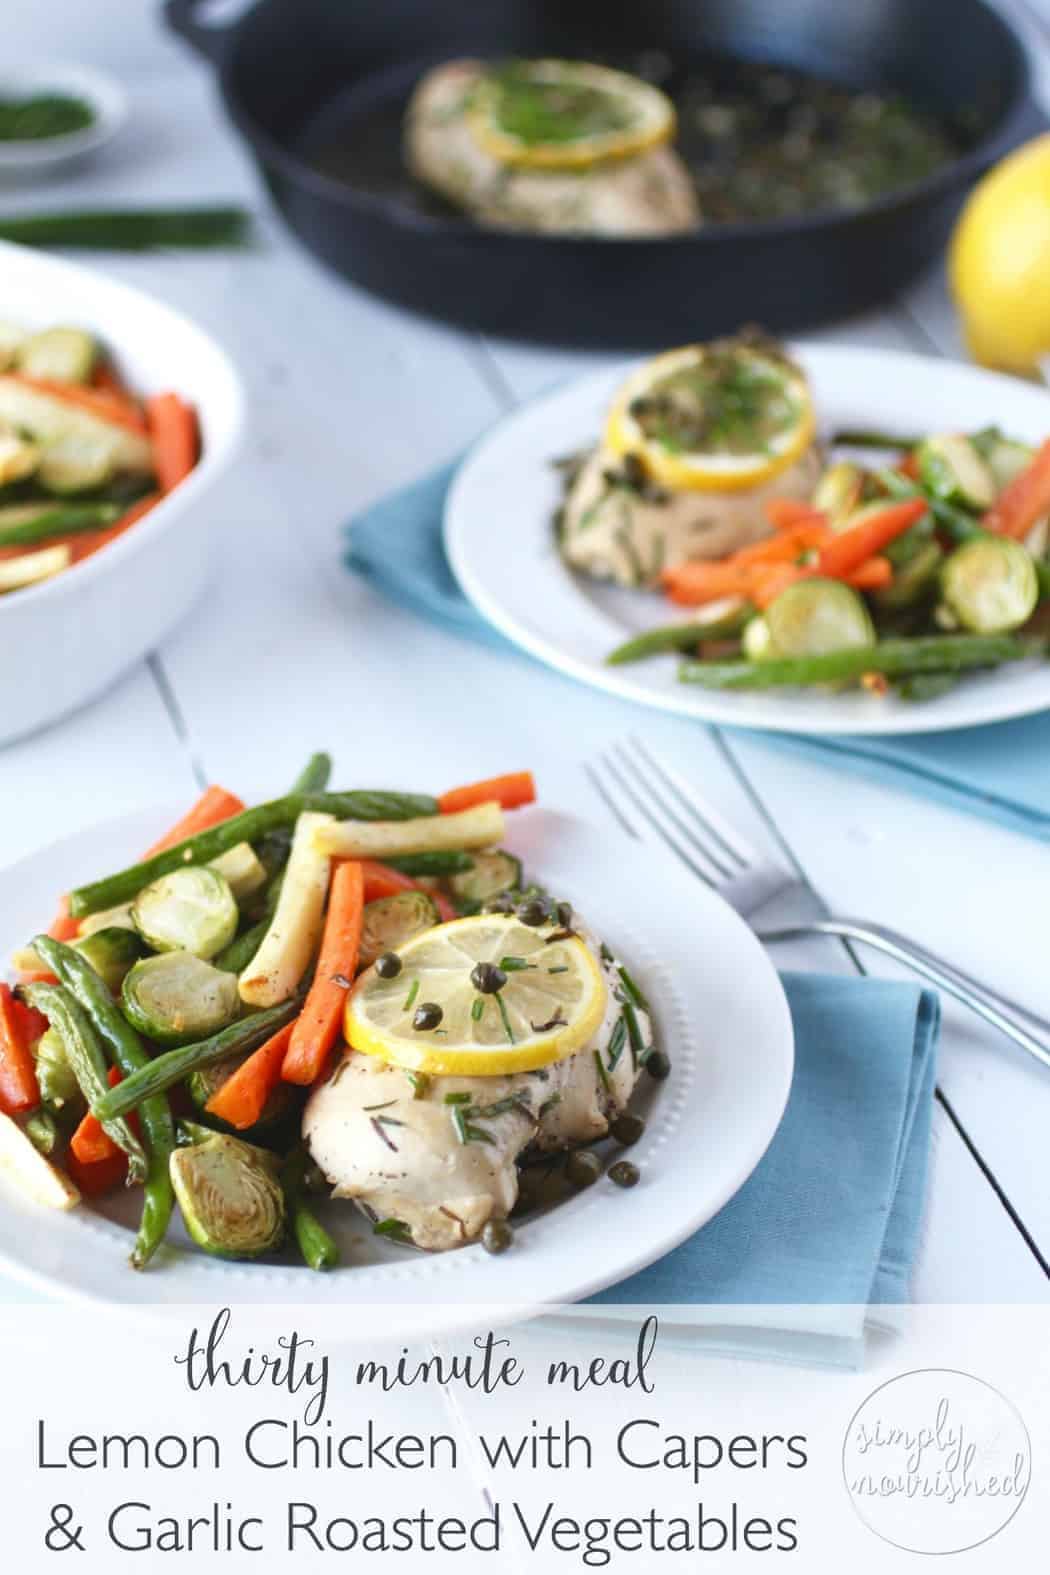 Lemon Chicken with Capers and Simple Roasted Veggies